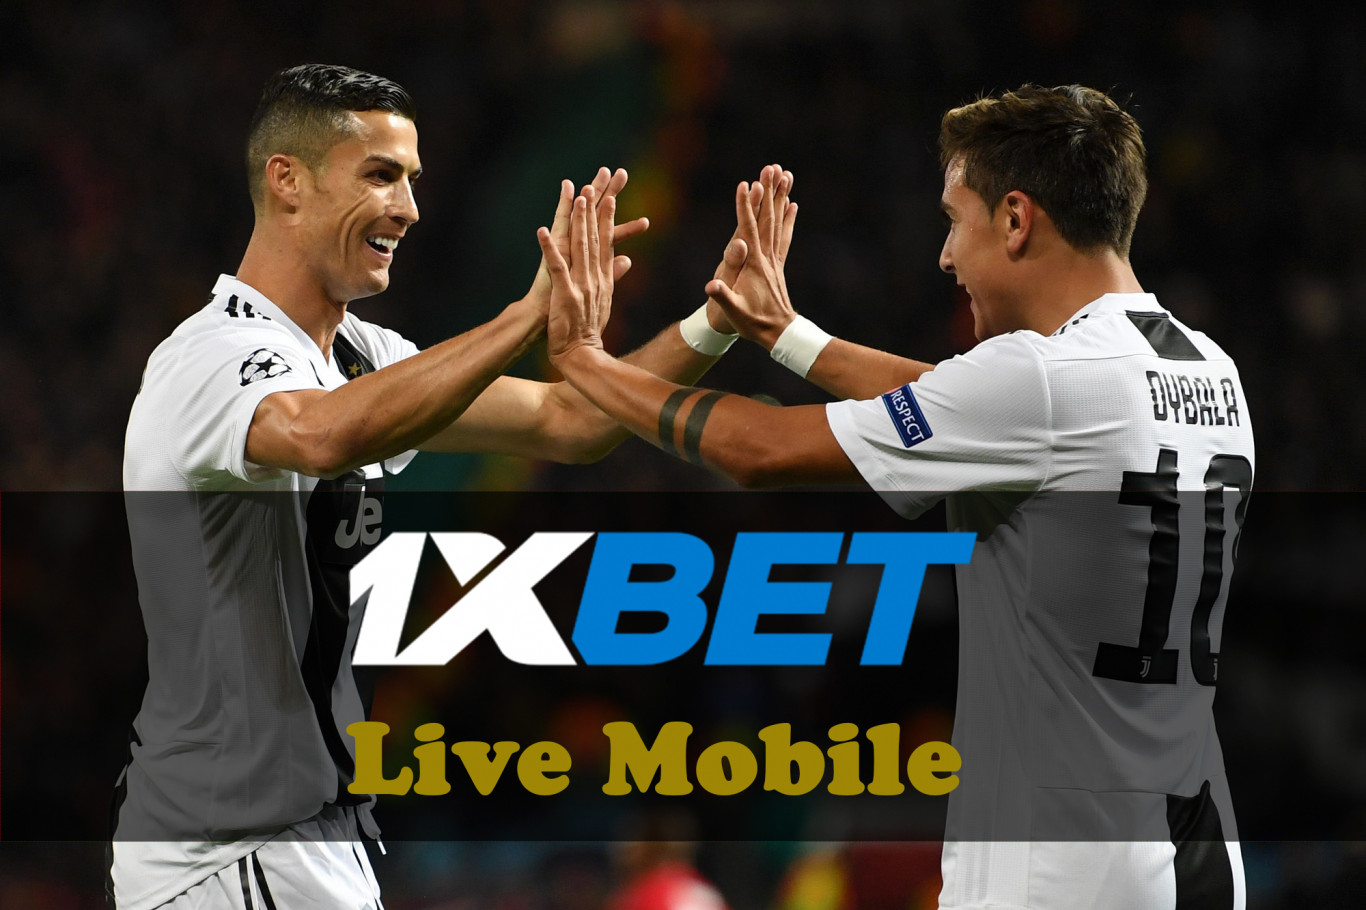 1xbet mobile